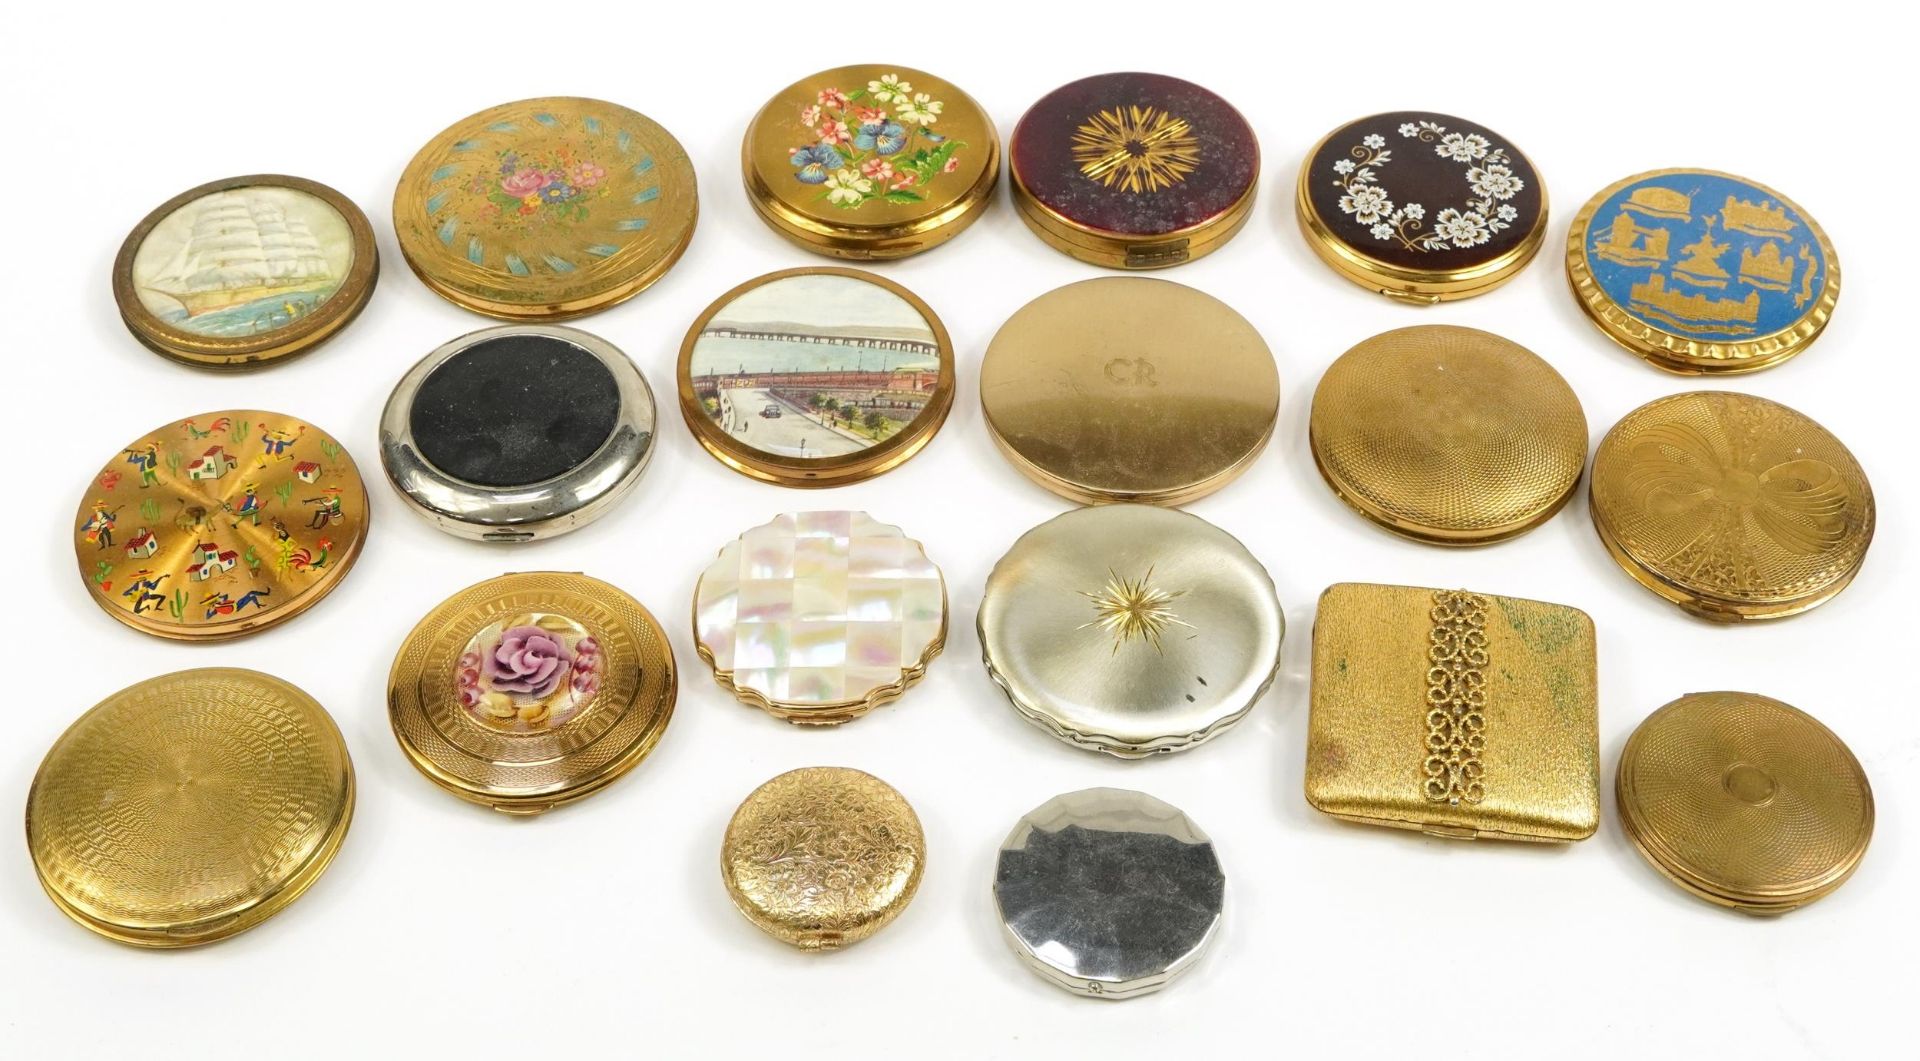 Twenty vintage and later compacts, some with enamel including Stratton, Avon and Yardley